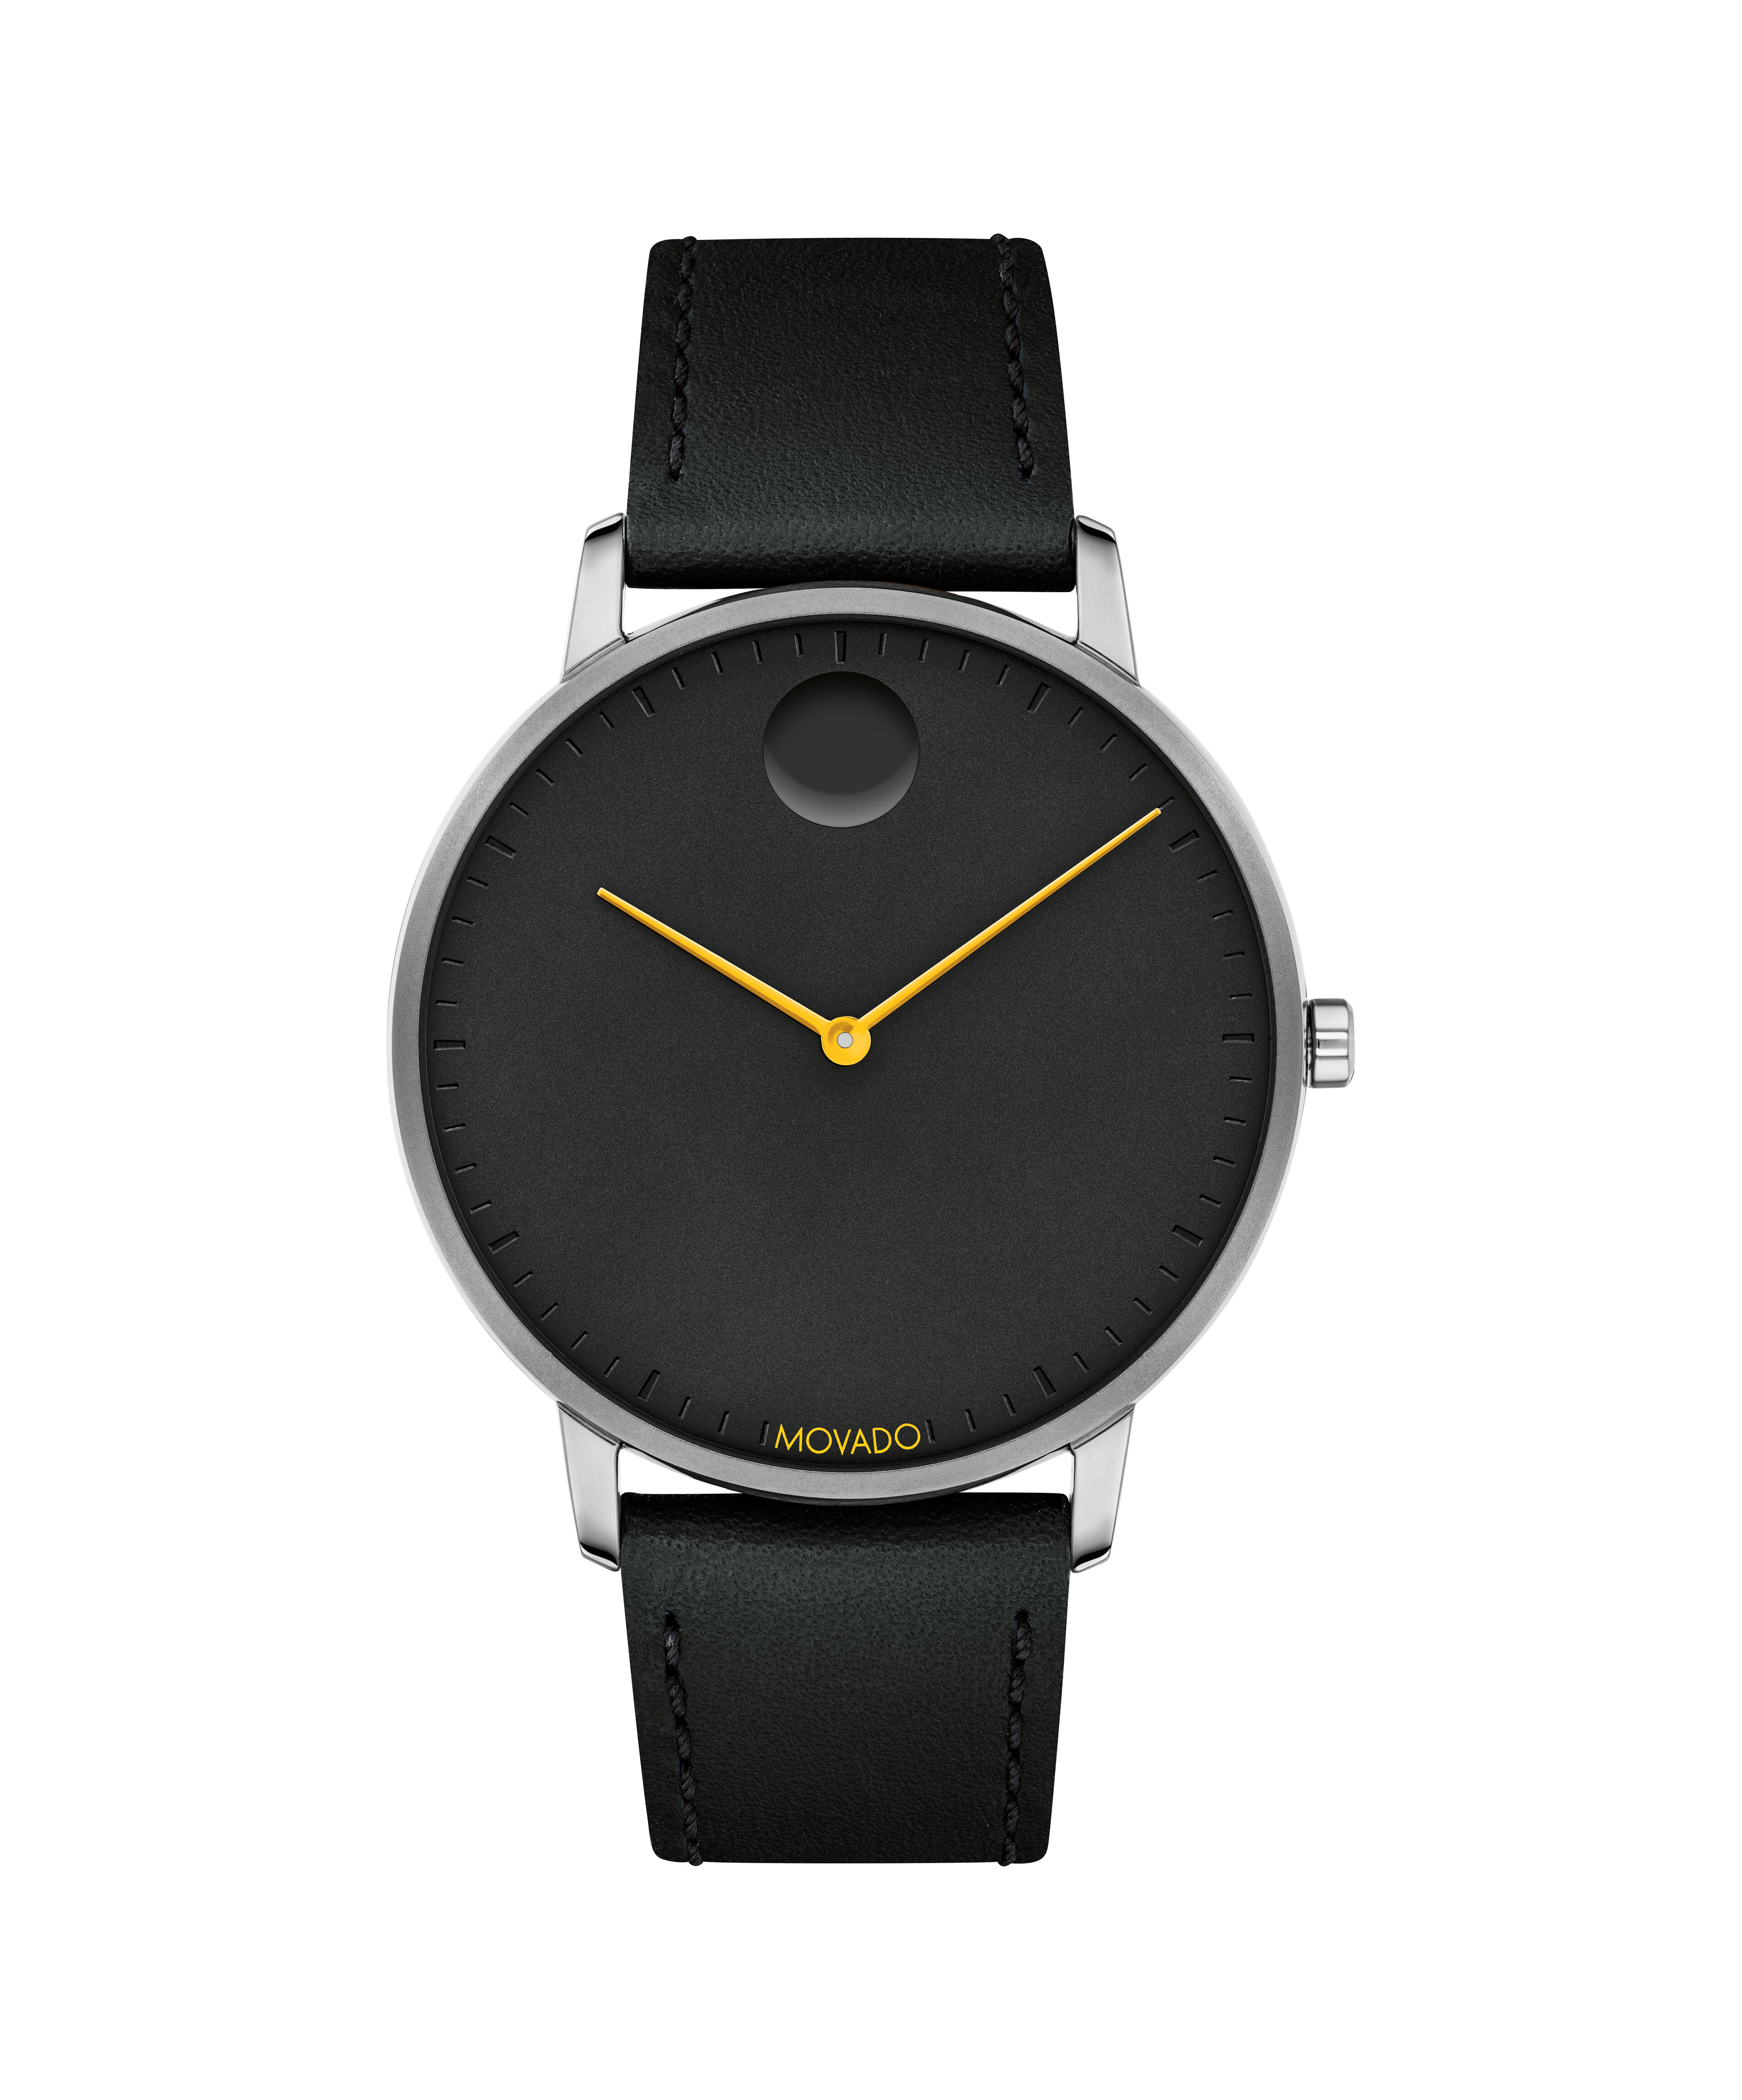 Movado Fake Watches For Sale